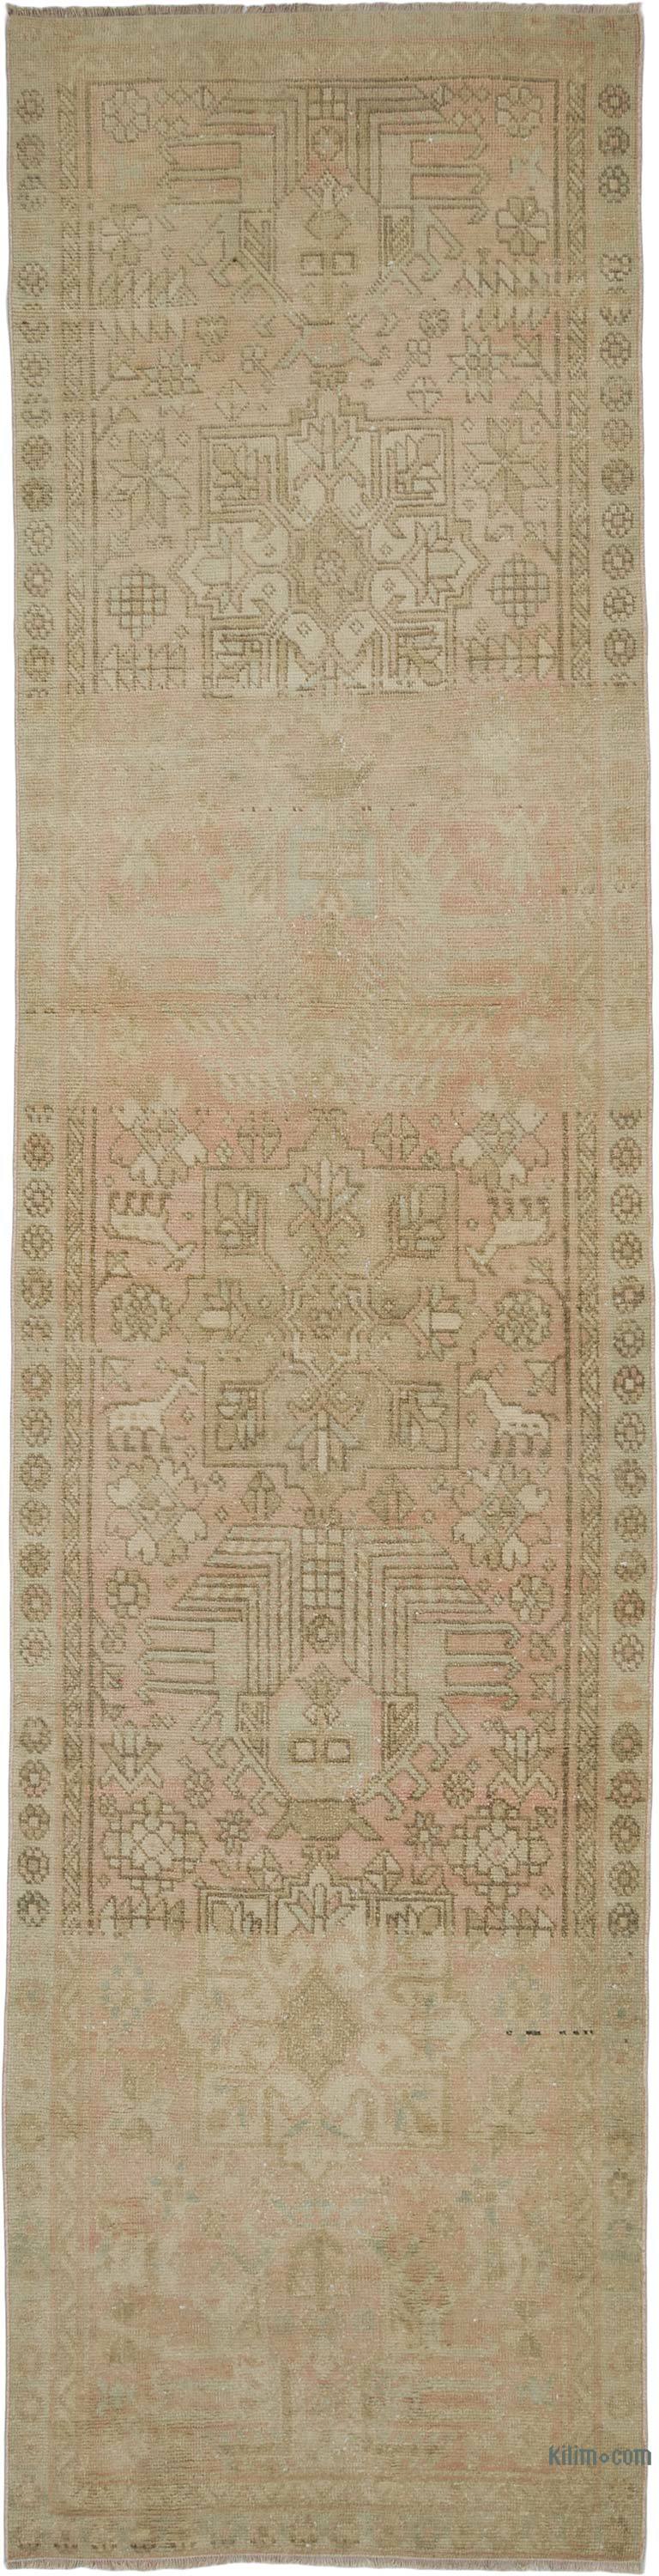 Vintage Persian Hand-Knotted Runner - 3' 1" x 12' 2" (37 in. x 146 in.) - K0057620